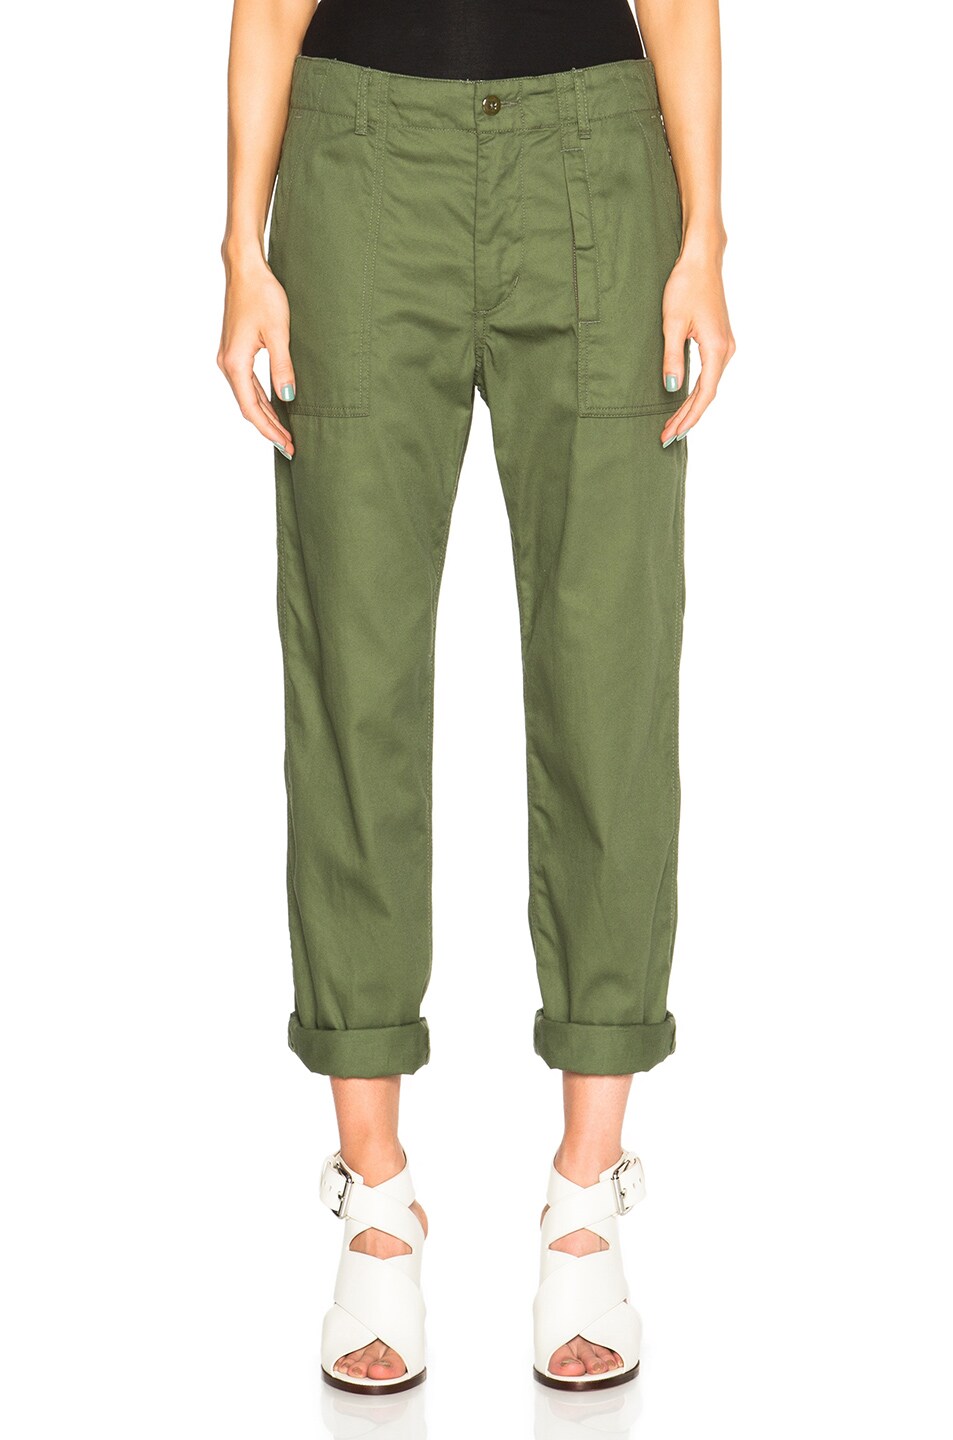 Image 1 of Engineered Garments Fatigue Pants in Olive Twill